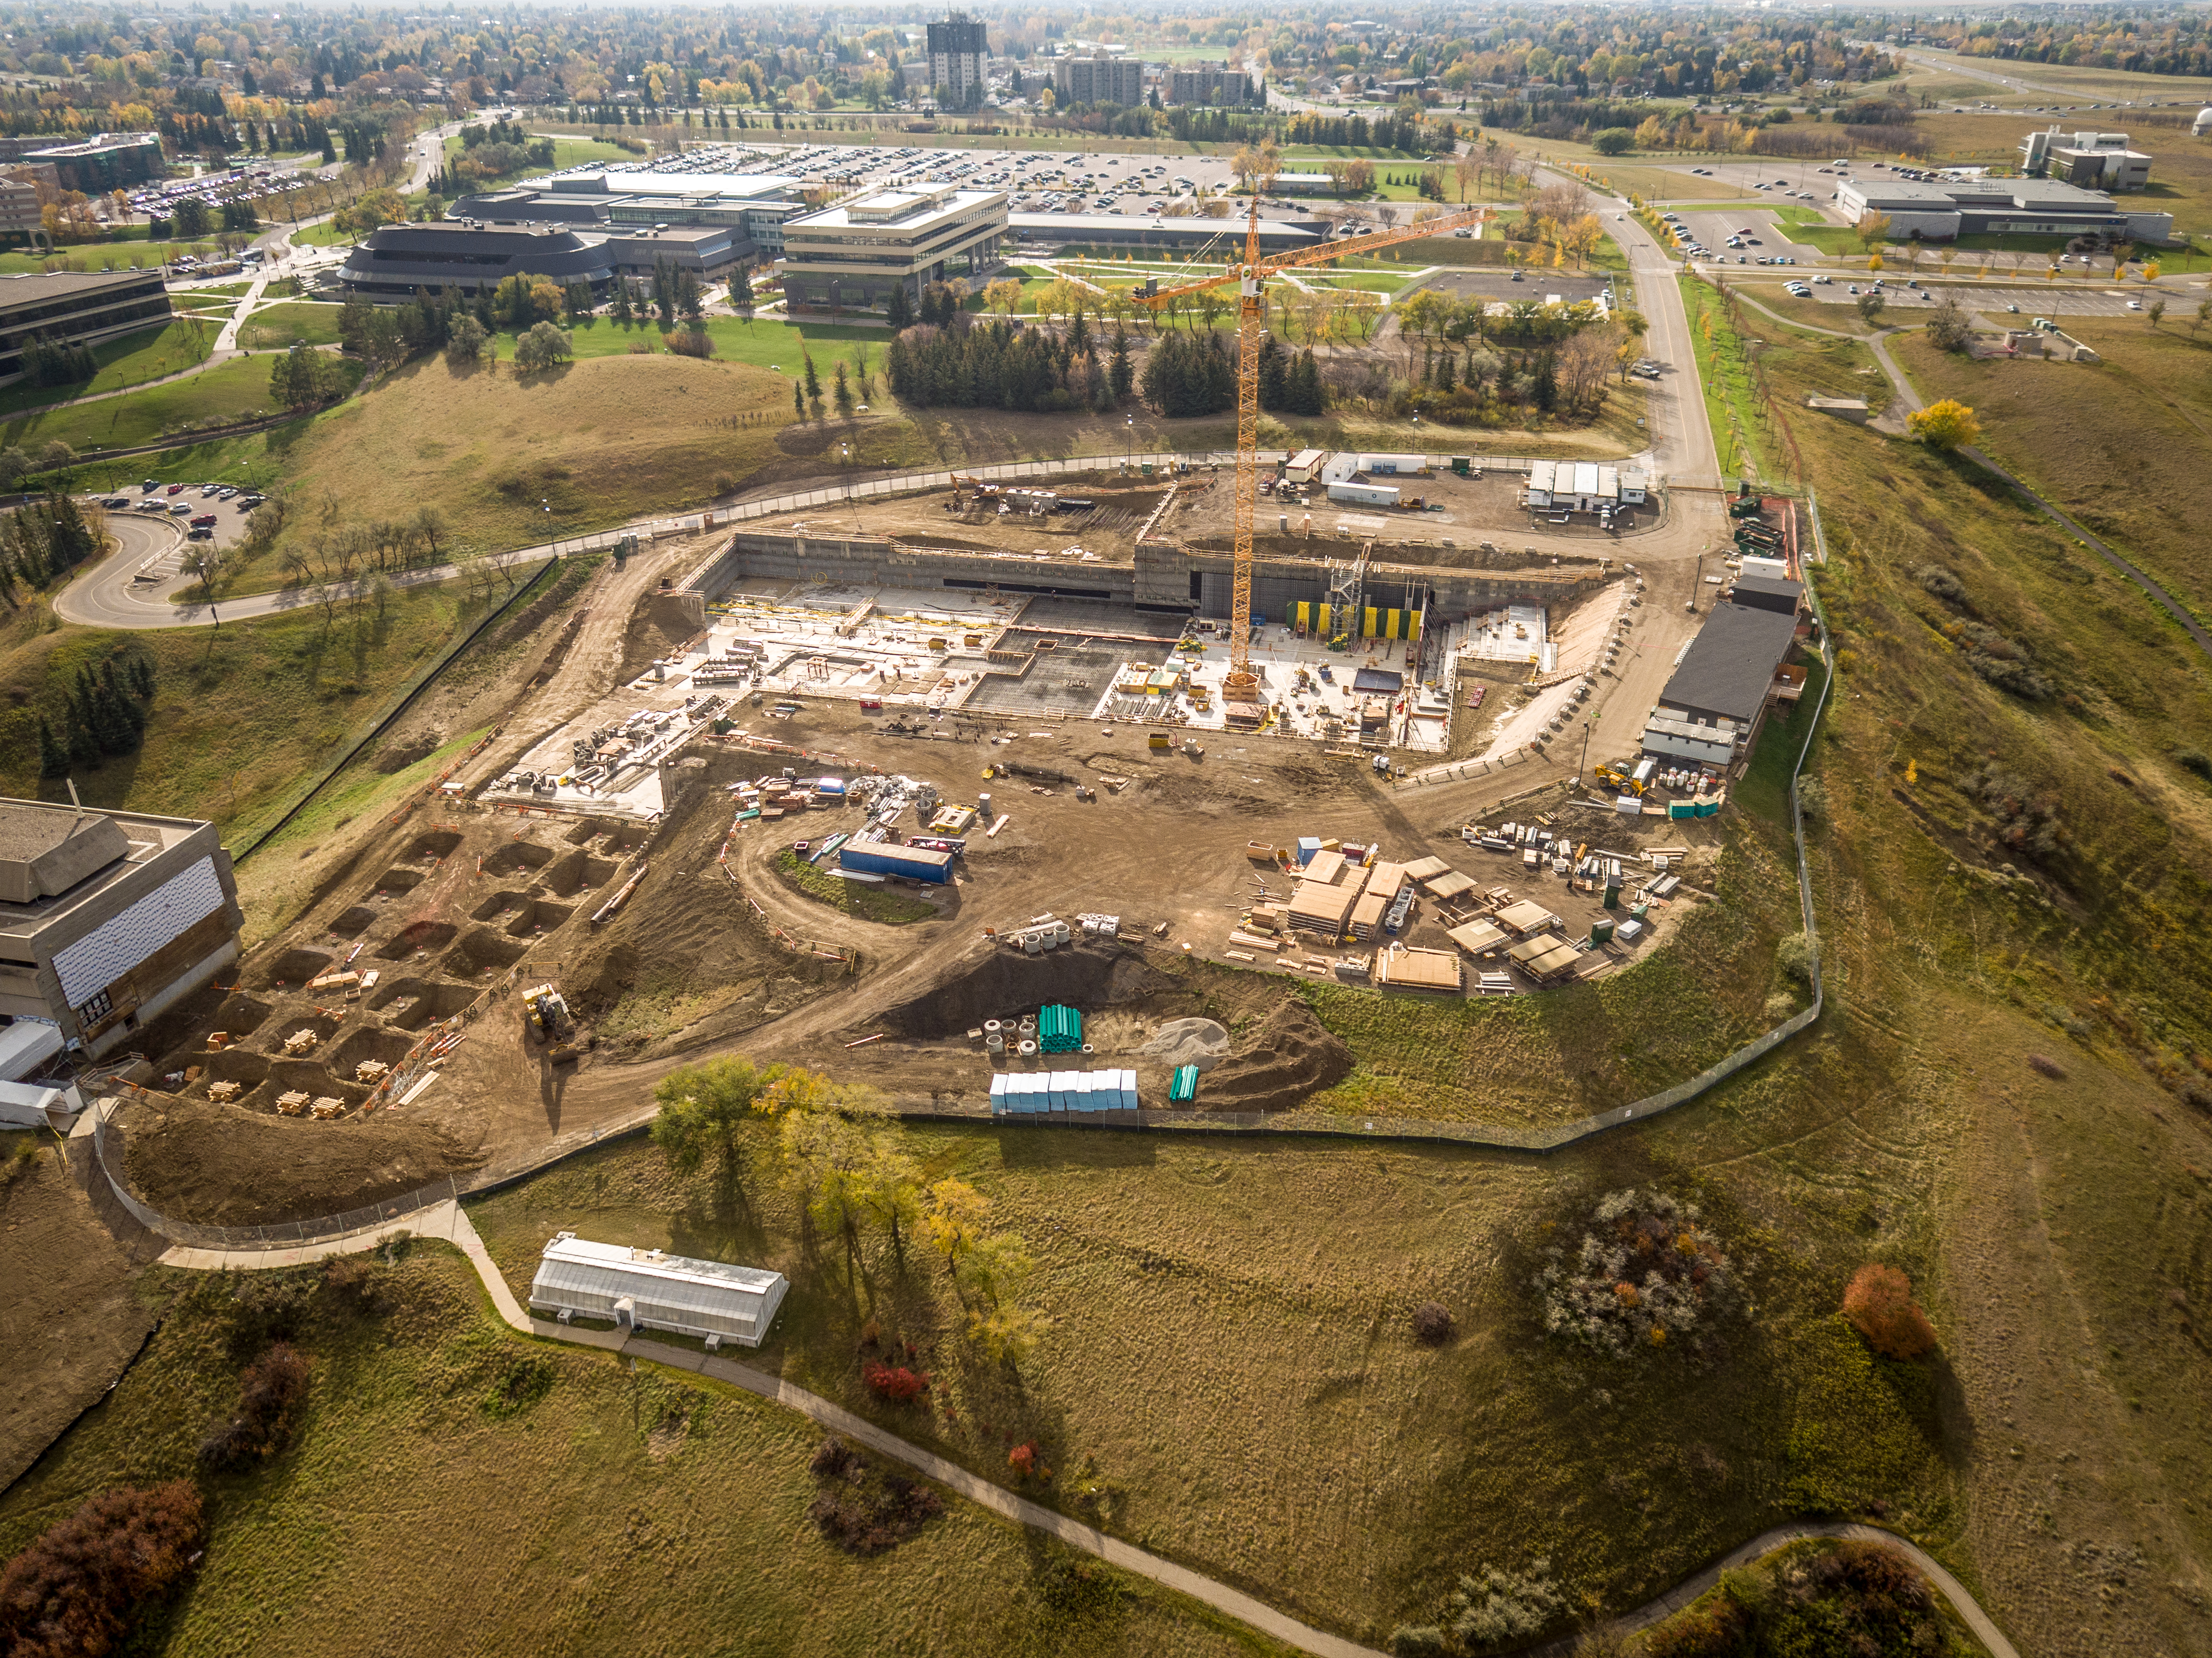 A Birdseye view of Big Yeller hard at work on the Destination Project site.